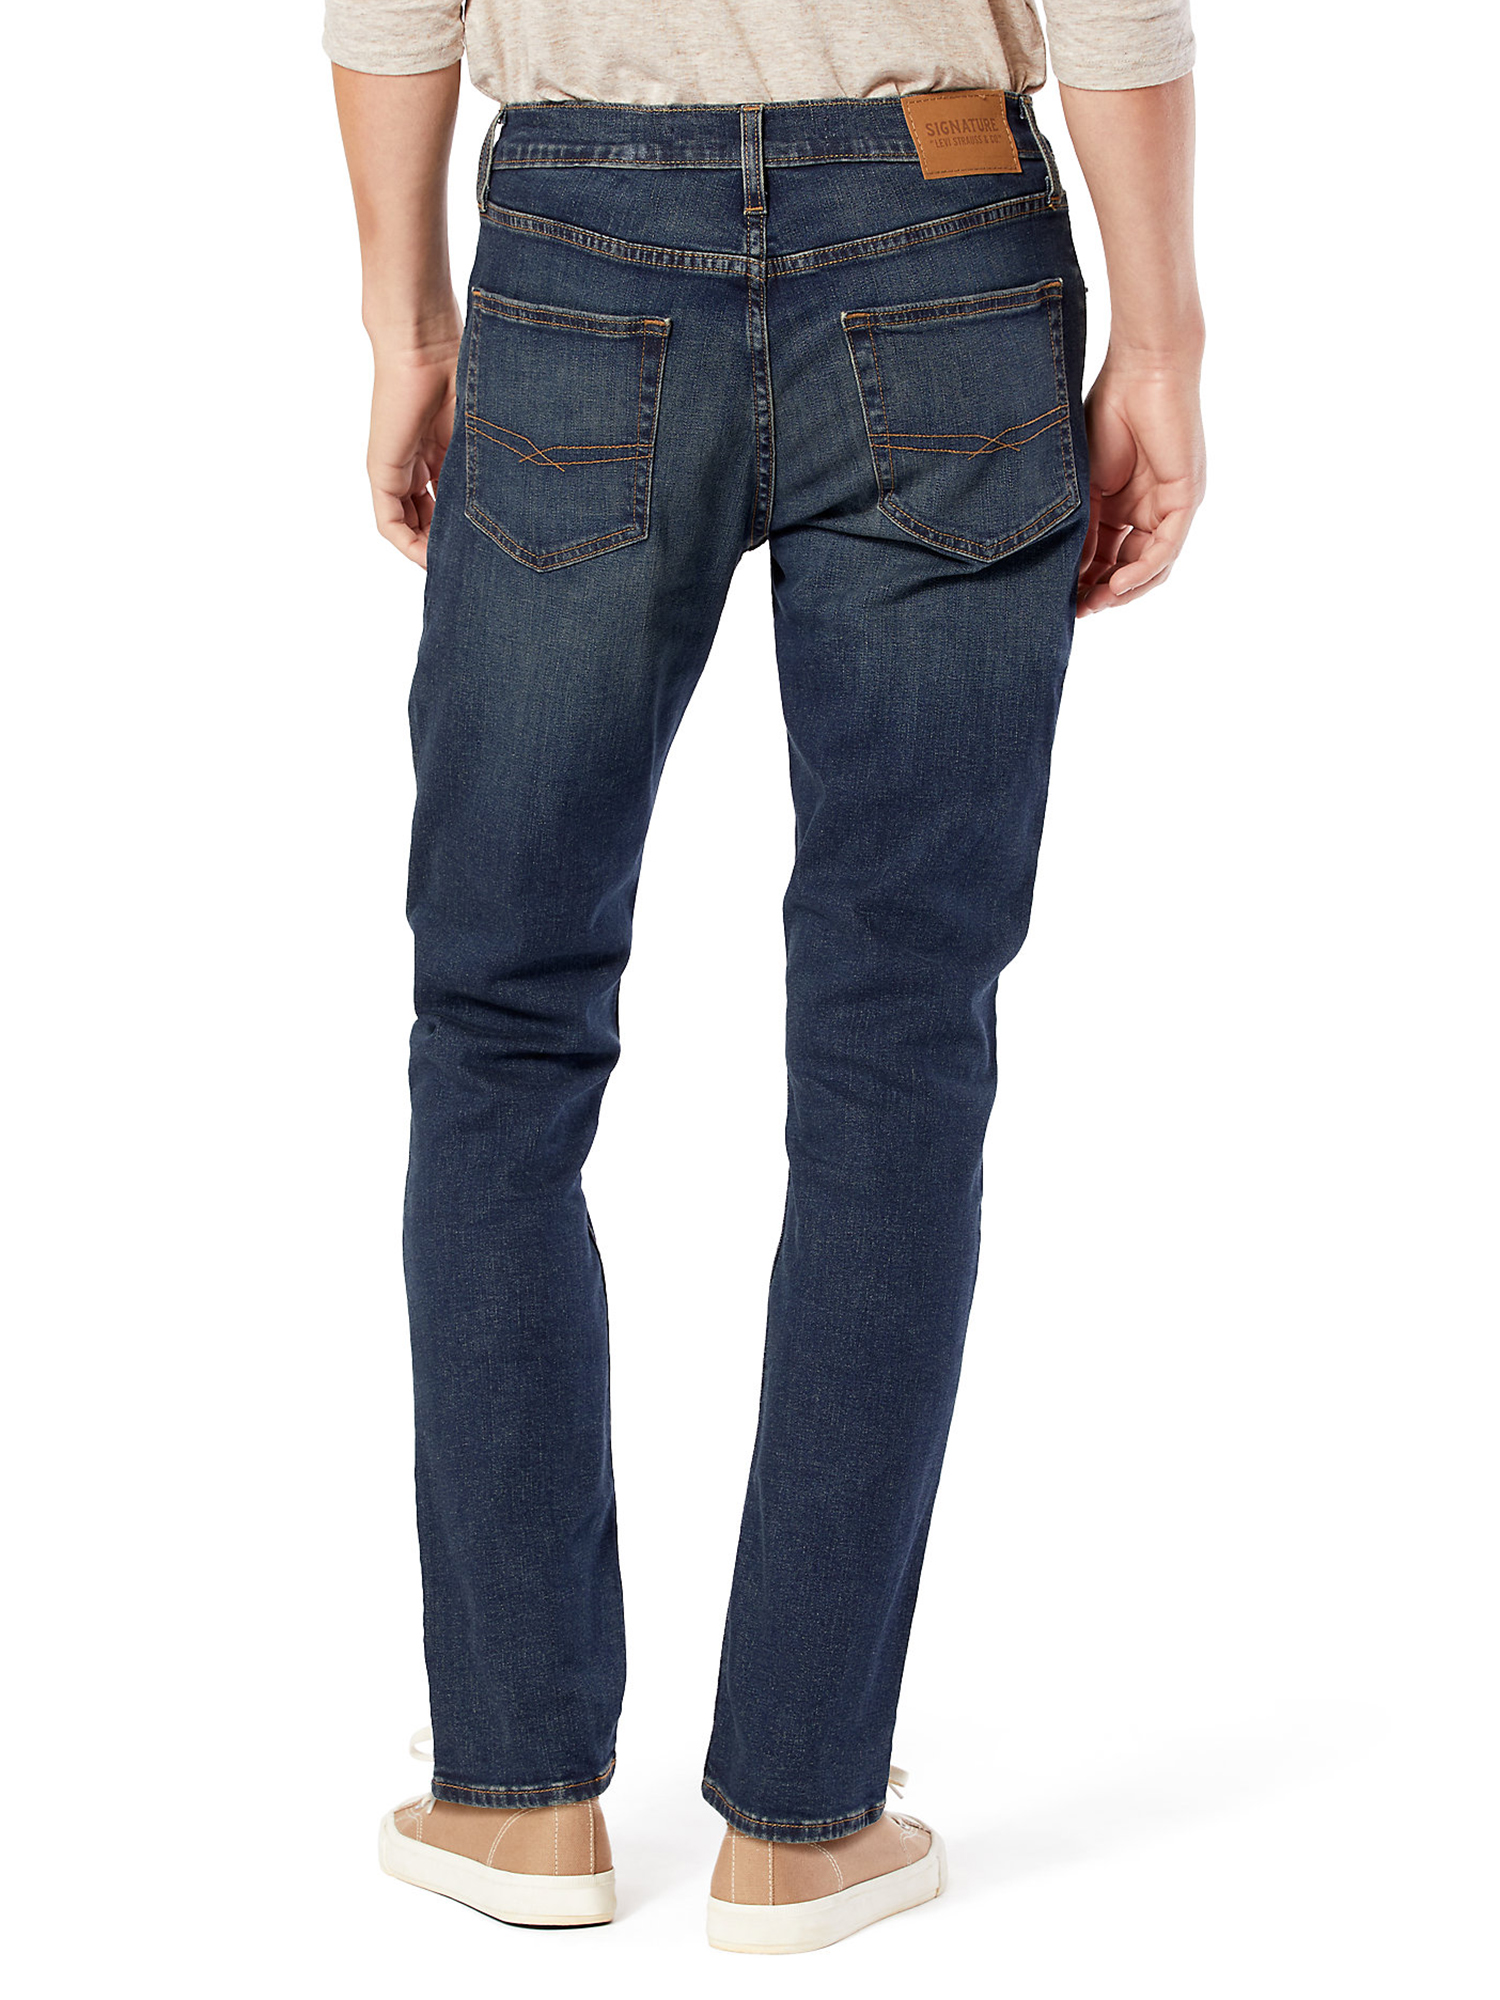 Signature by Levi Strauss & Co. Men's and Big Men's Slim Fit Jeans - image 3 of 6